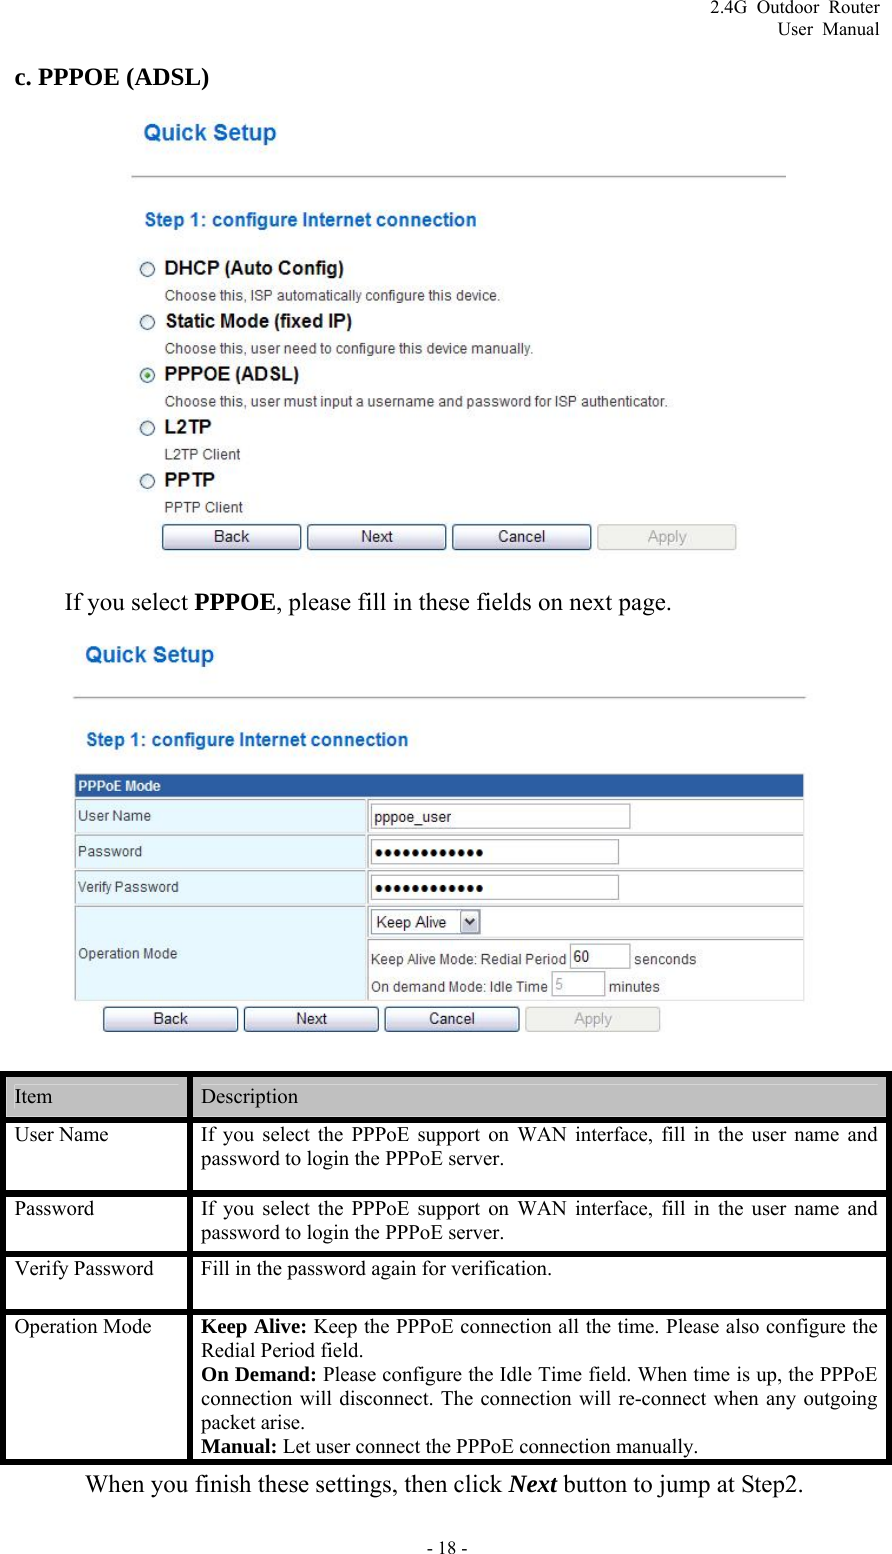 2.4G Outdoor Router User Manual c. PPPOE (ADSL)  If you select PPPOE, please fill in these fields on next page.  Item   Description  User Name  If you select the PPPoE support on WAN interface, fill in the user name and password to login the PPPoE server.   Password  If you select the PPPoE support on WAN interface, fill in the user name and password to login the PPPoE server. Verify Password    Fill in the password again for verification. Operation Mode  Keep Alive: Keep the PPPoE connection all the time. Please also configure the Redial Period field. On Demand: Please configure the Idle Time field. When time is up, the PPPoE connection will disconnect. The connection will re-connect when any outgoing packet arise. Manual: Let user connect the PPPoE connection manually.   When you finish these settings, then click Next button to jump at Step2. - 18 - 